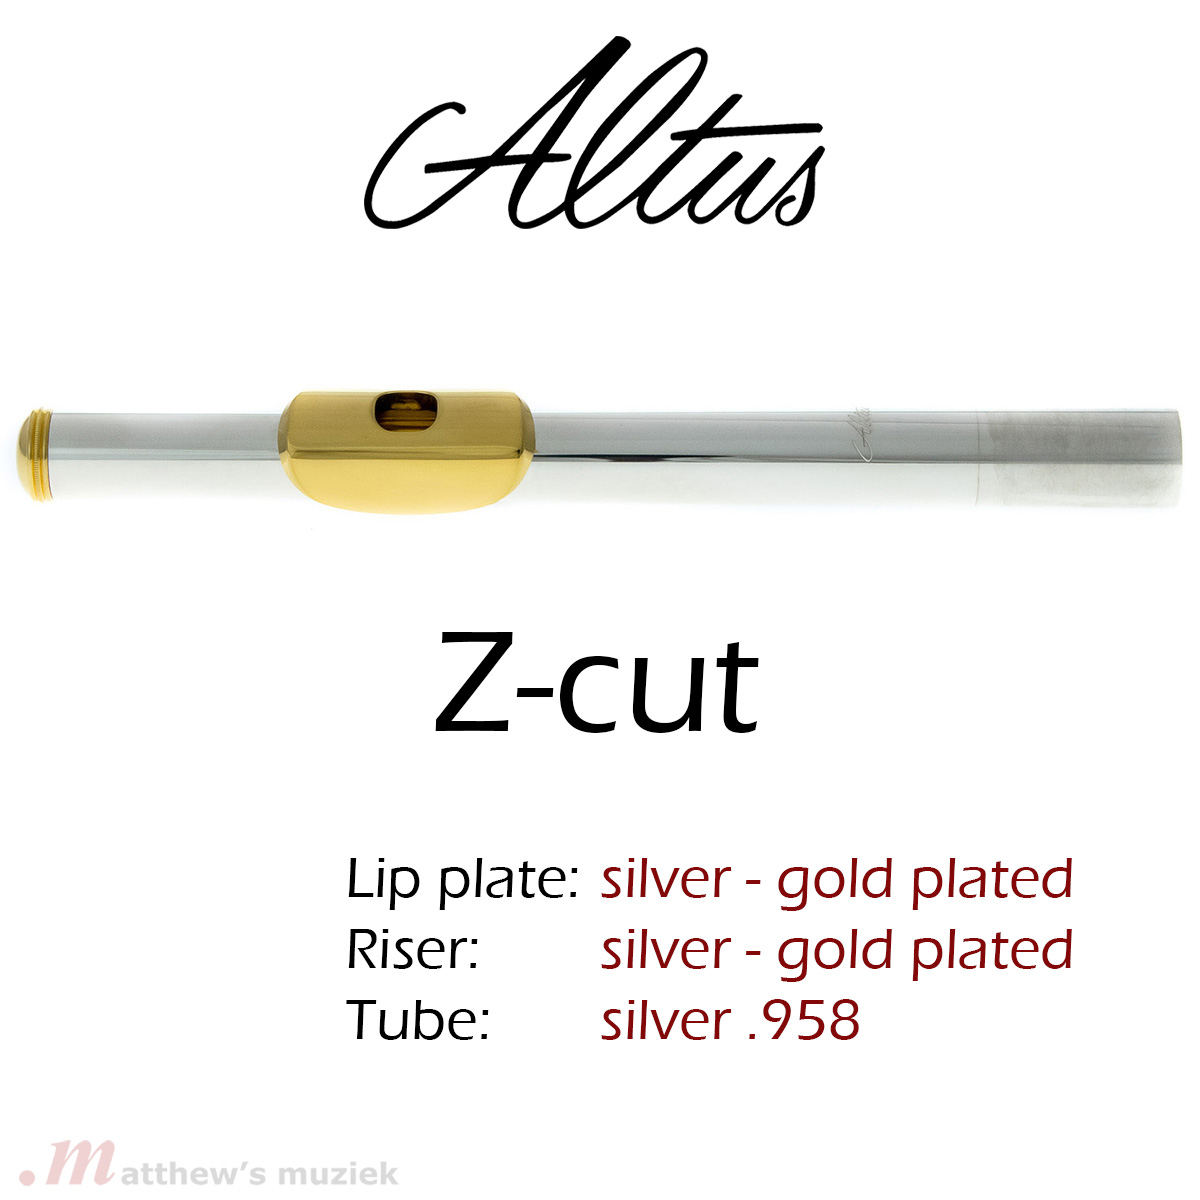 Altus Headjoint - Z-Cut - Brittania Silver with Gold-Plated Lipplate and Riser